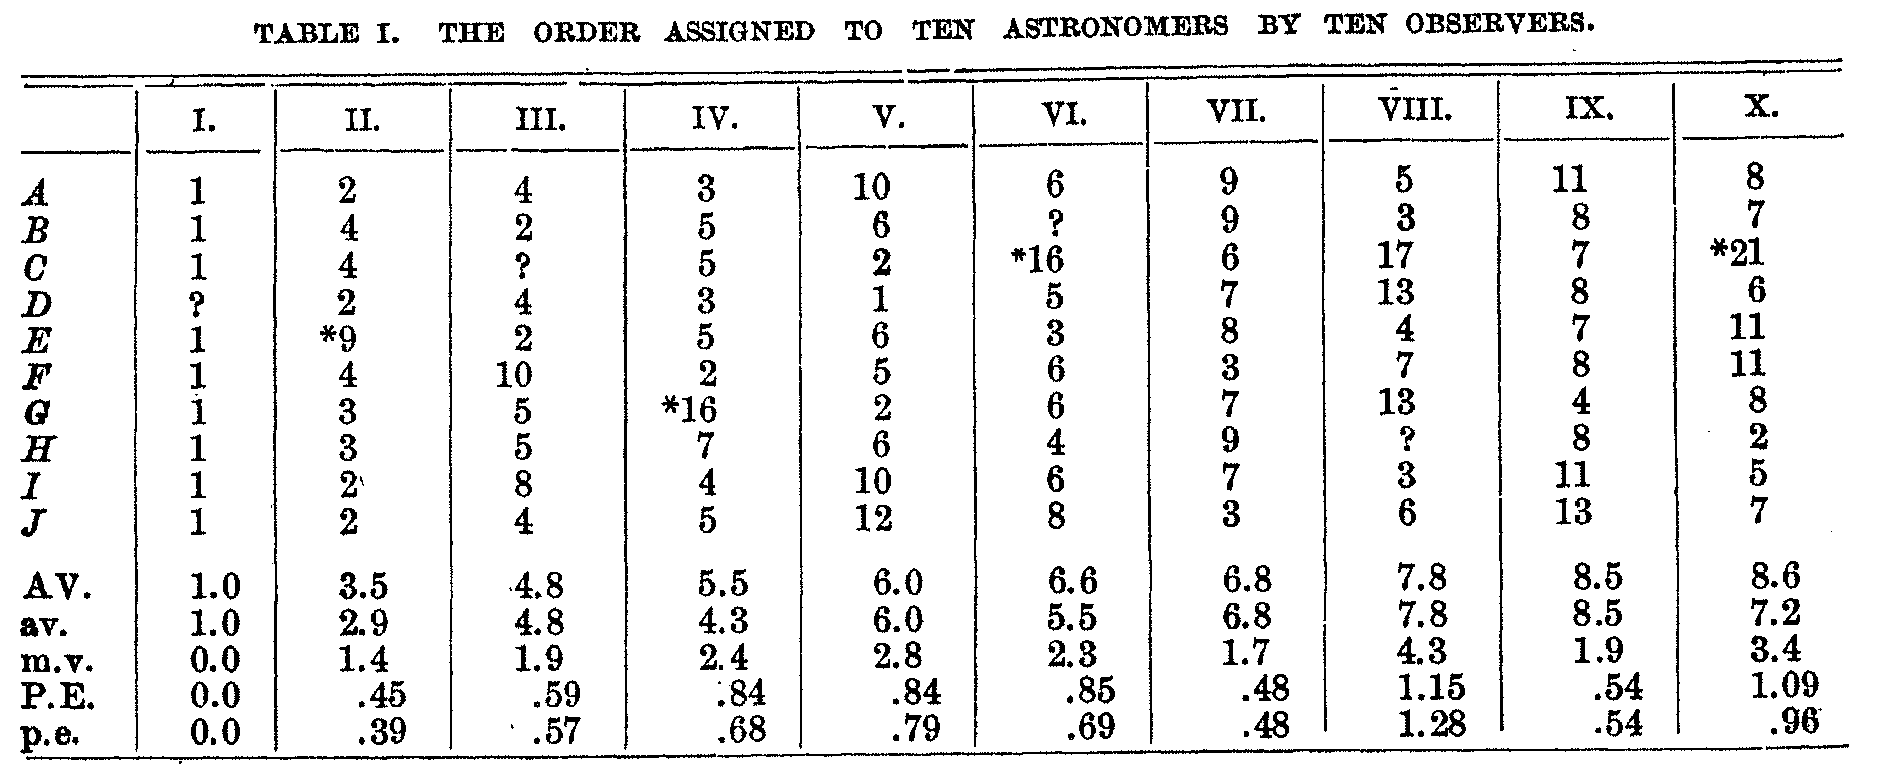 Table 1, the order assigned to 10 astronomers by 10 observers